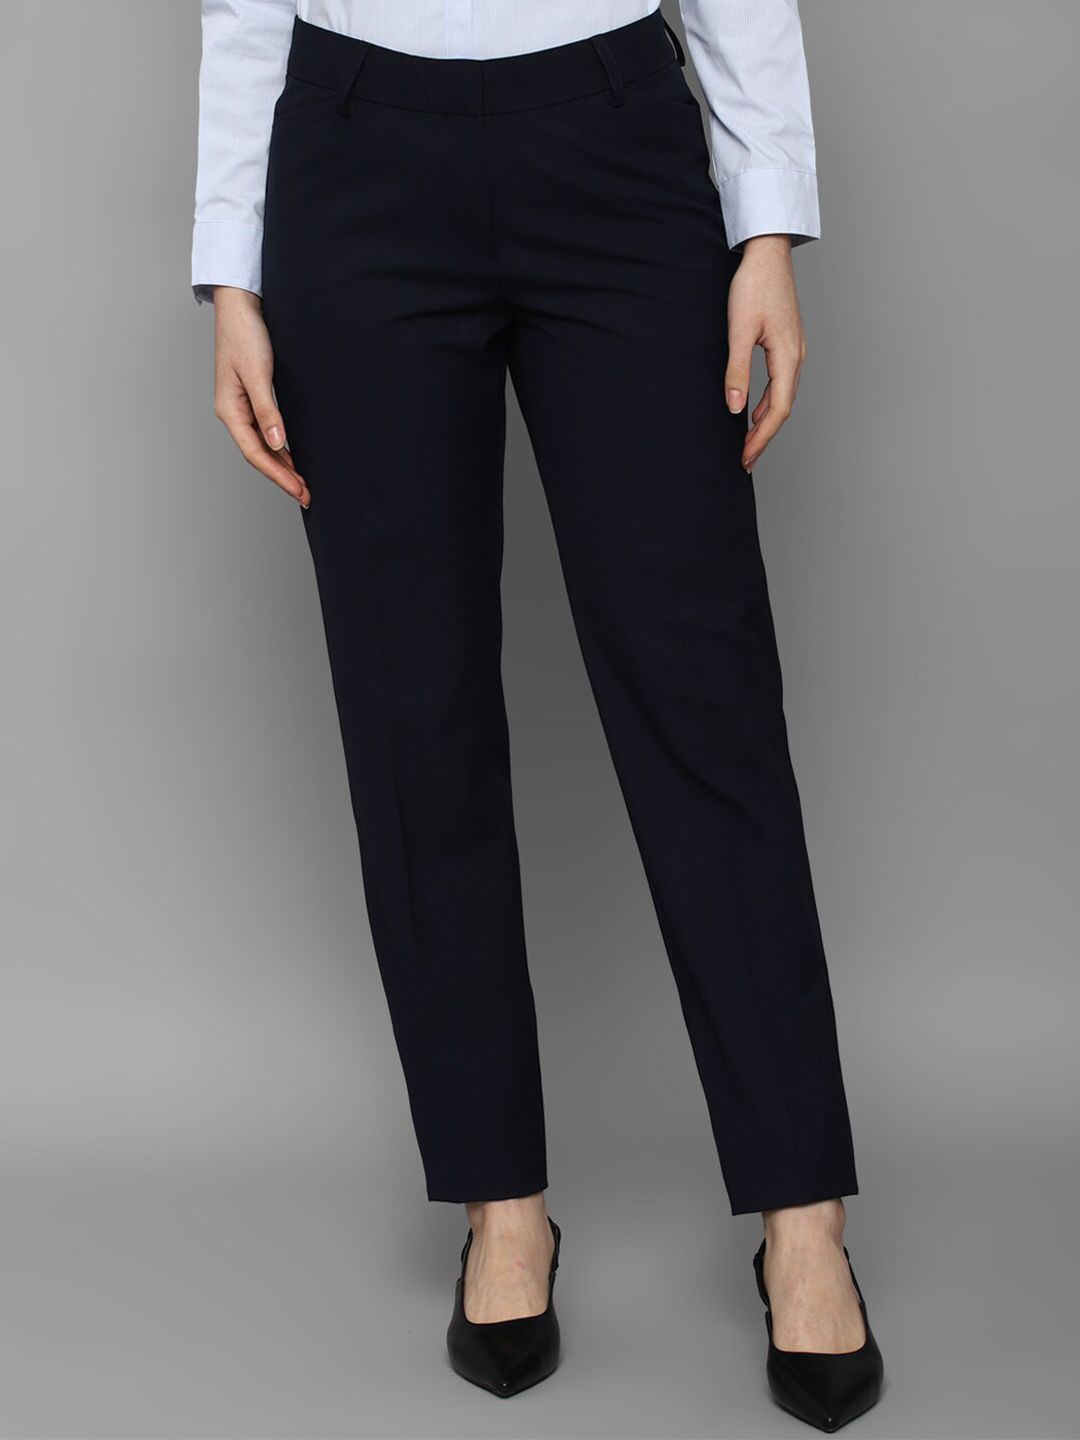 Allen Solly Woman Women Navy Blue Formal Trousers Price in India